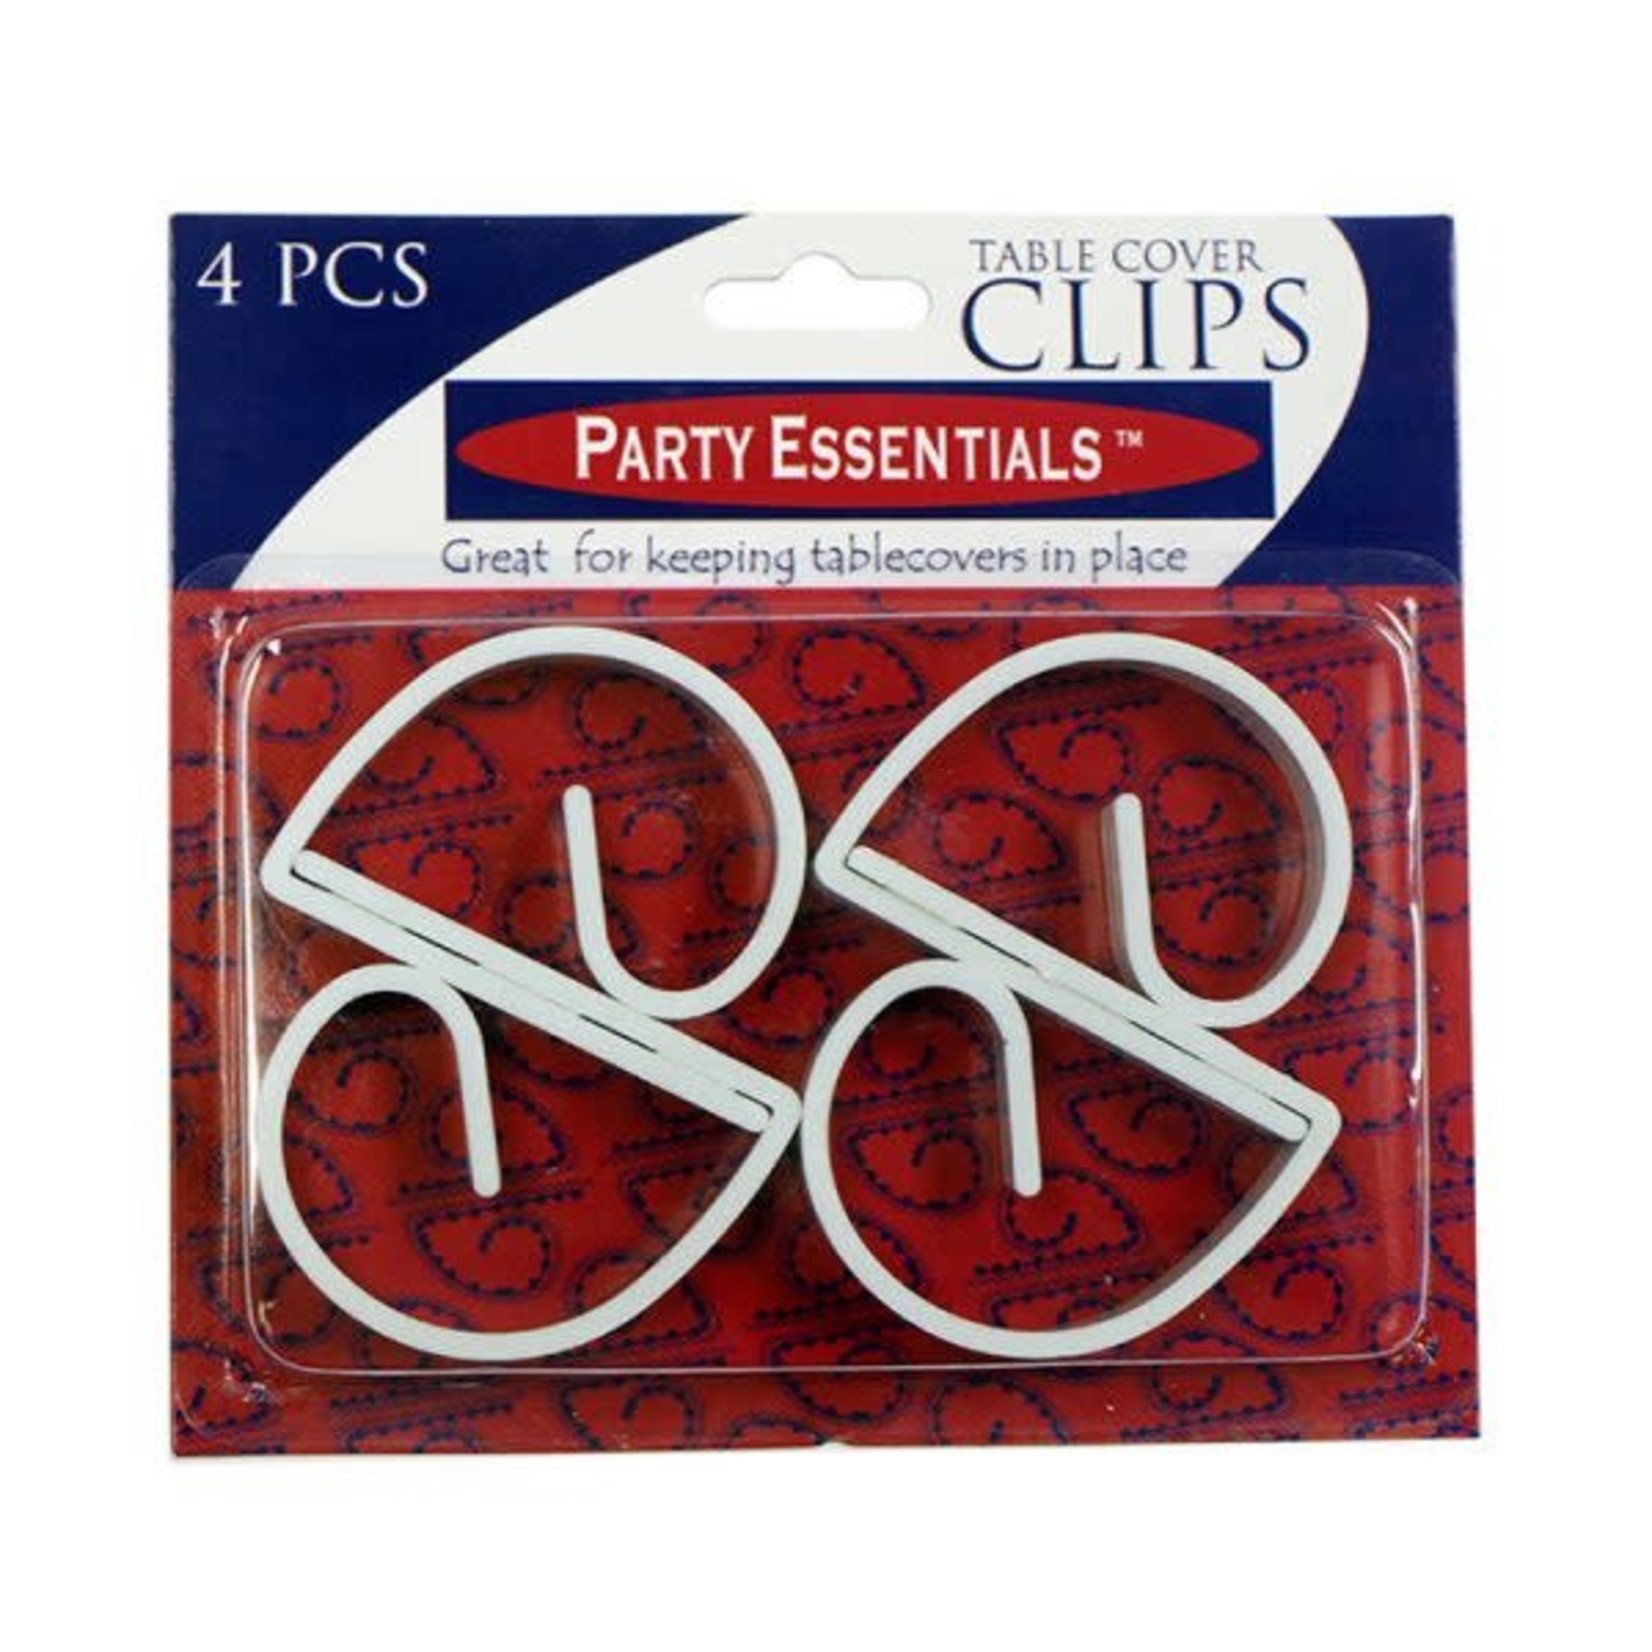 northwest White Table Cover Clips - 4ct.